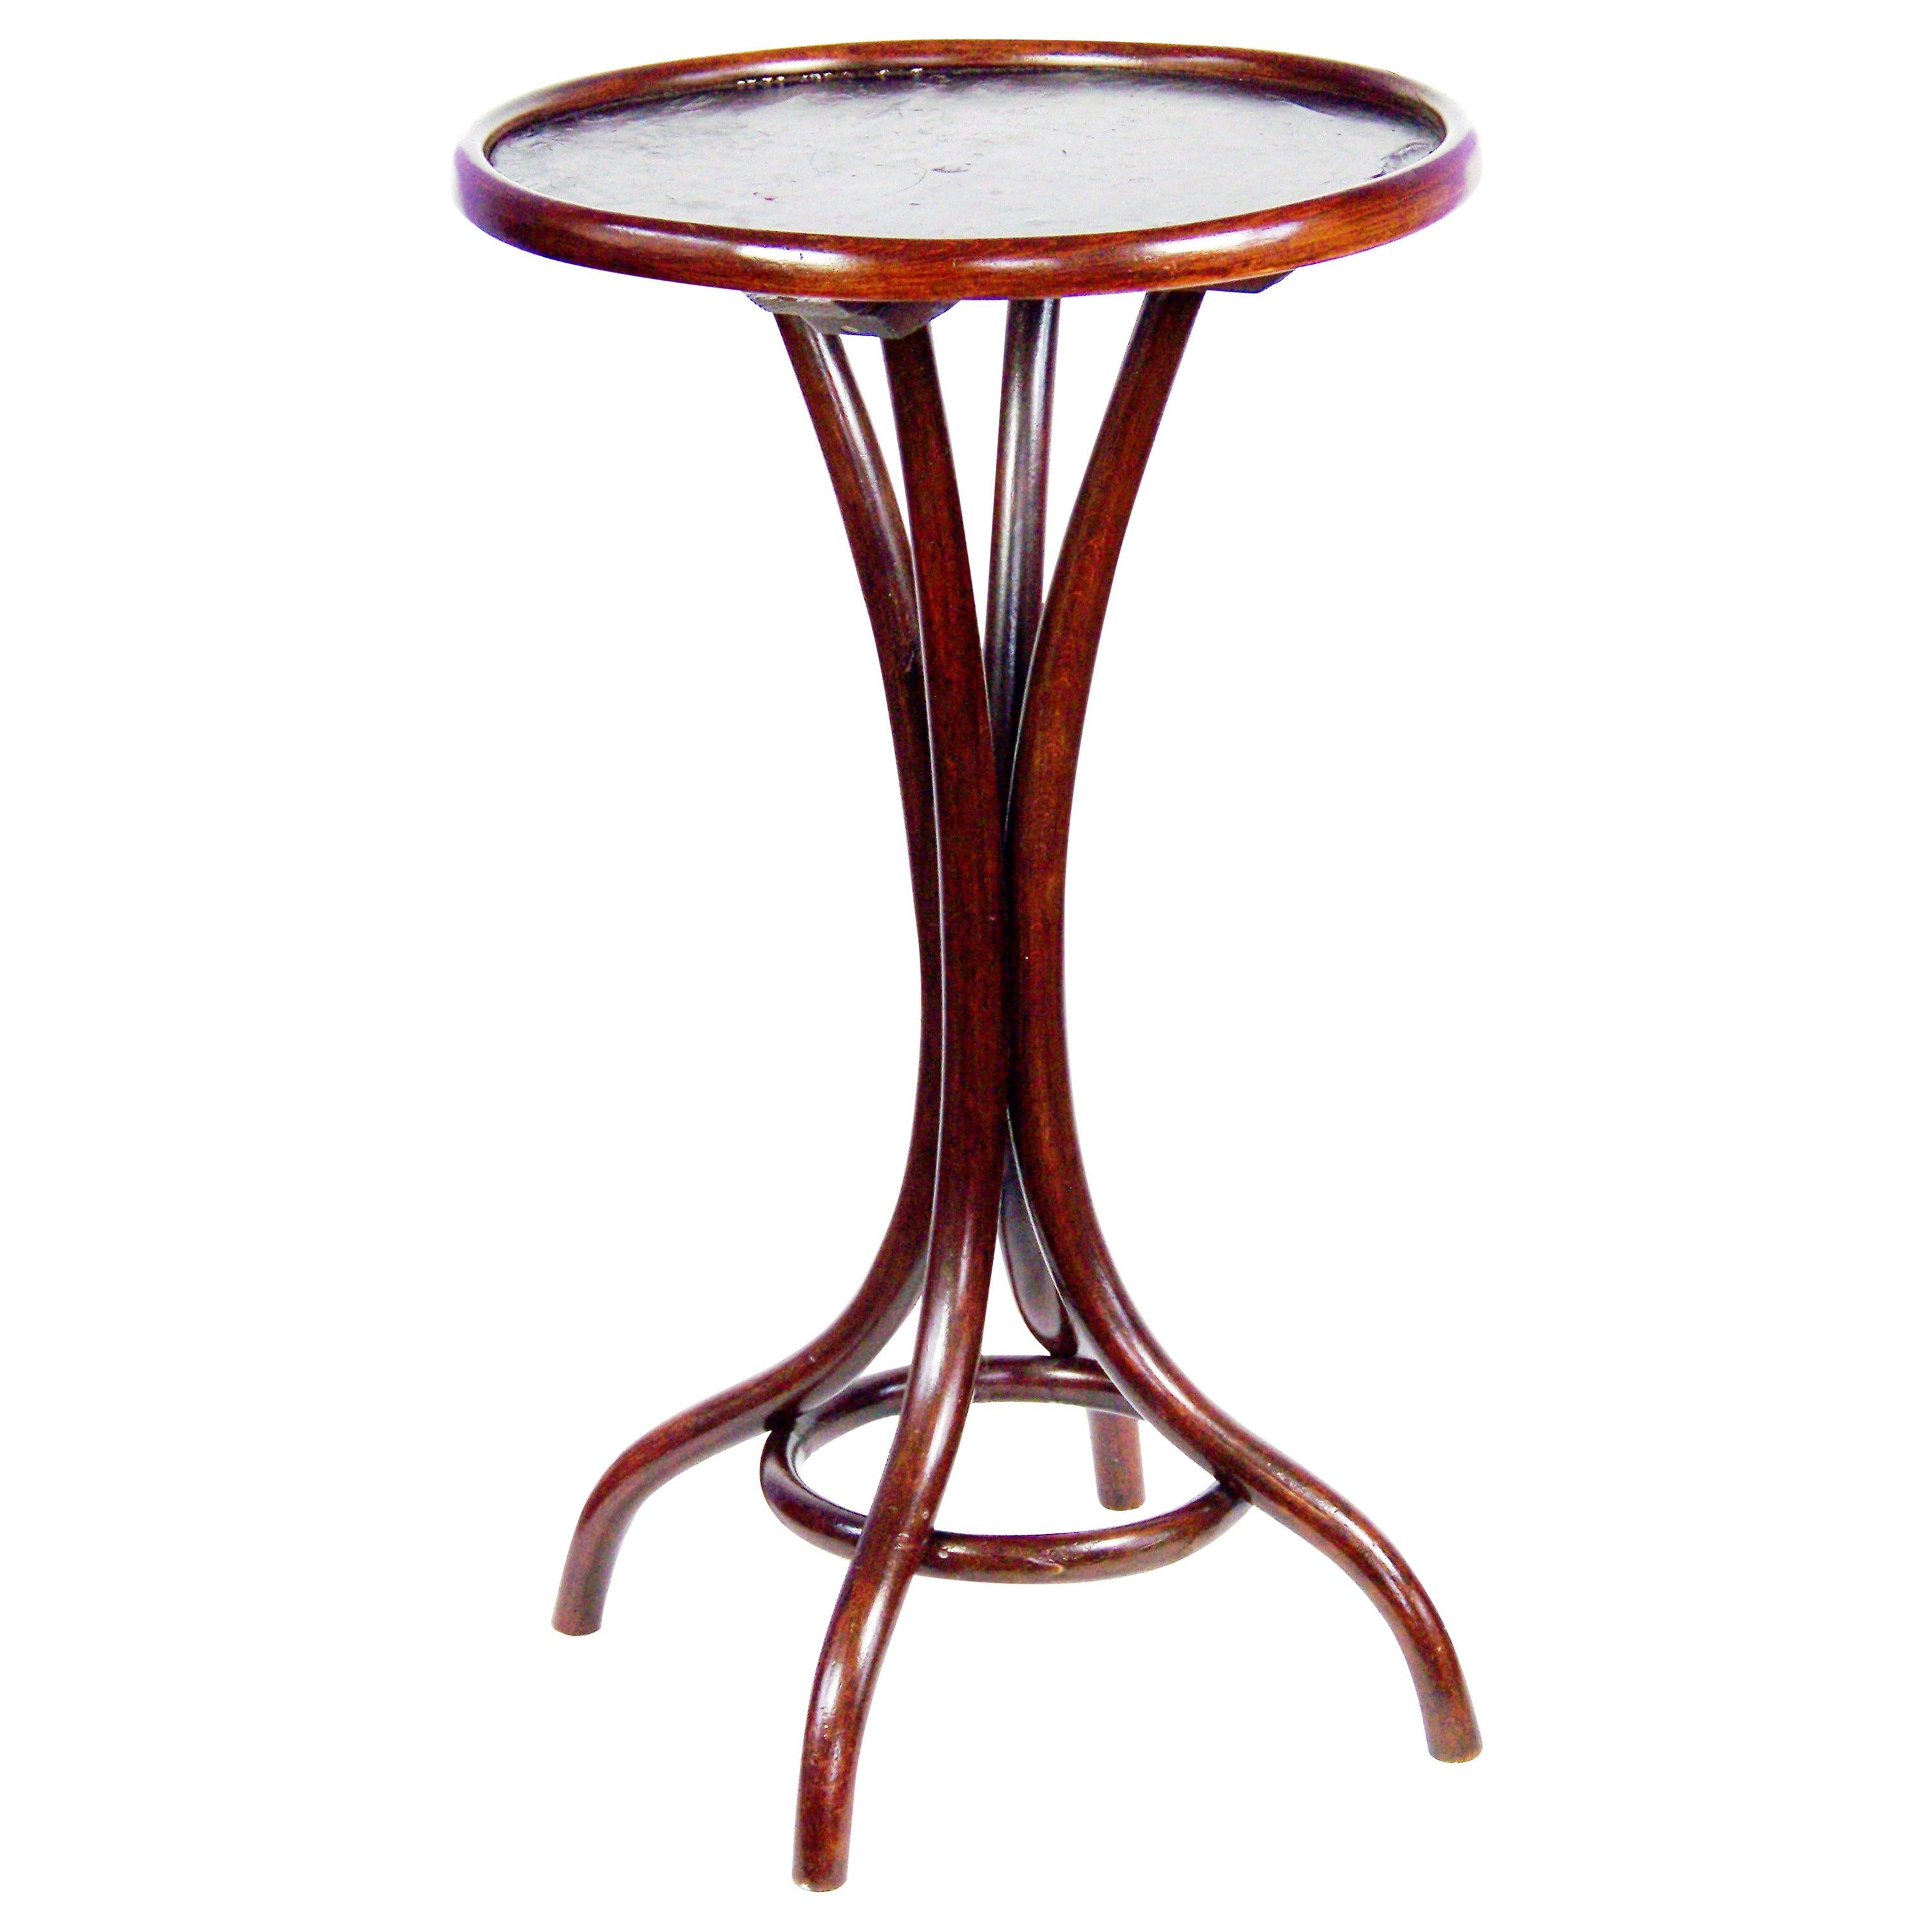 Thonet Table Nr.1 with Waxed Cloth Covered, circa 1900